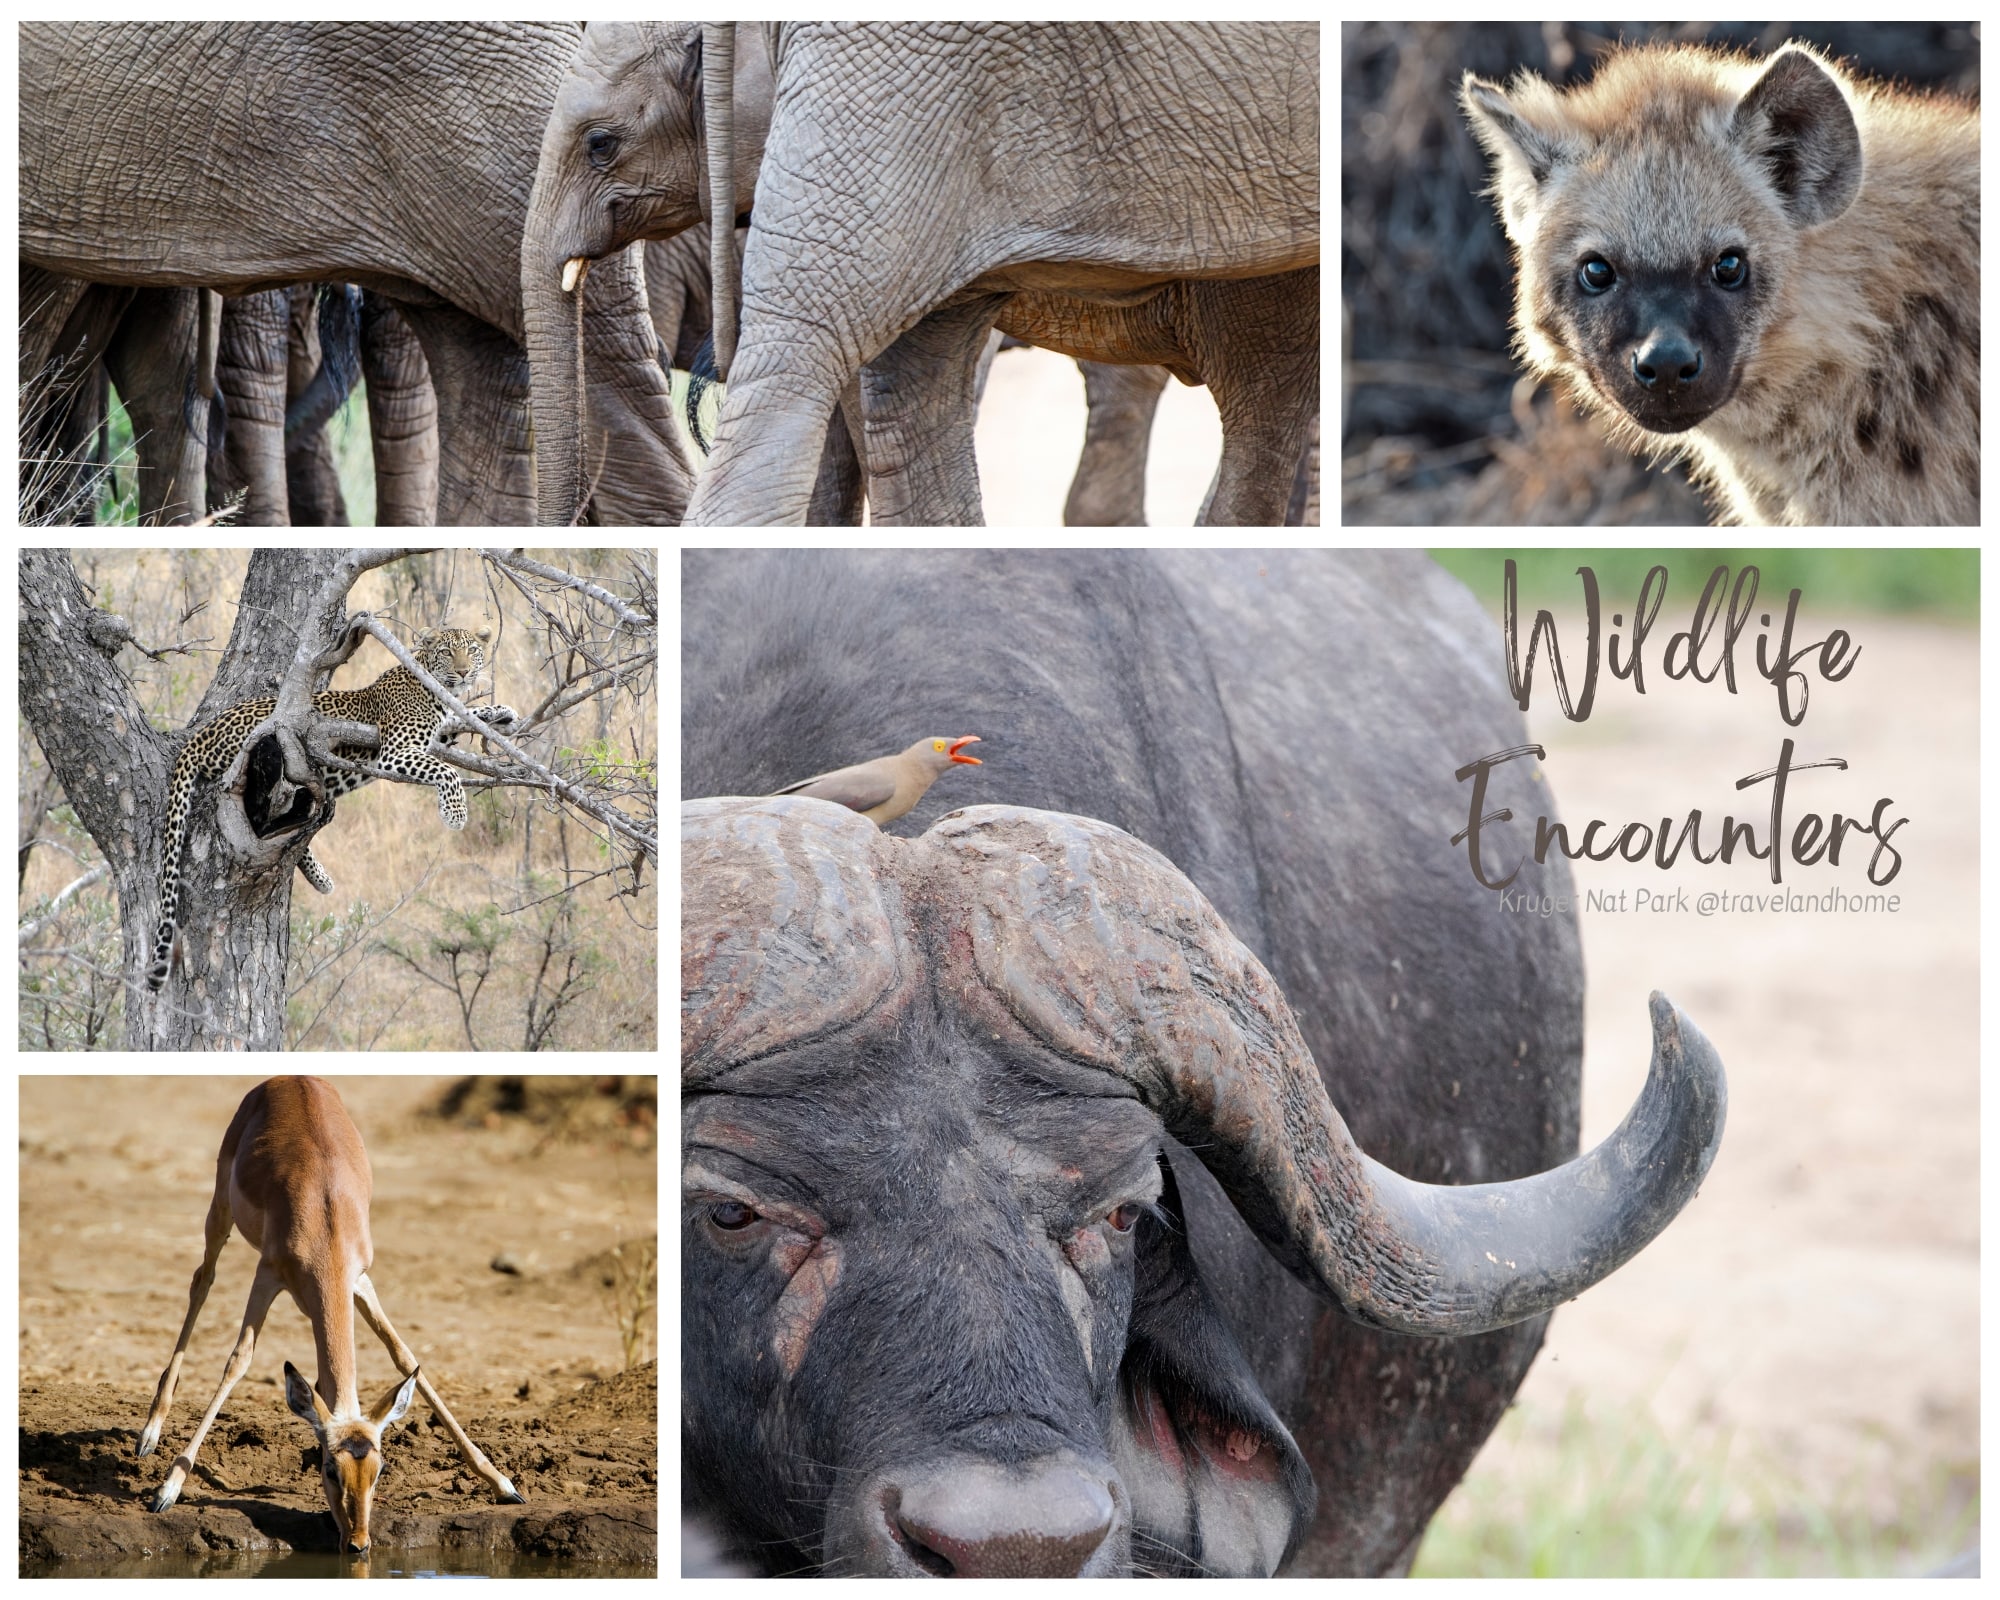 Kruger National Park, safari, south africa, wildlife encounters, nature and game reserve min